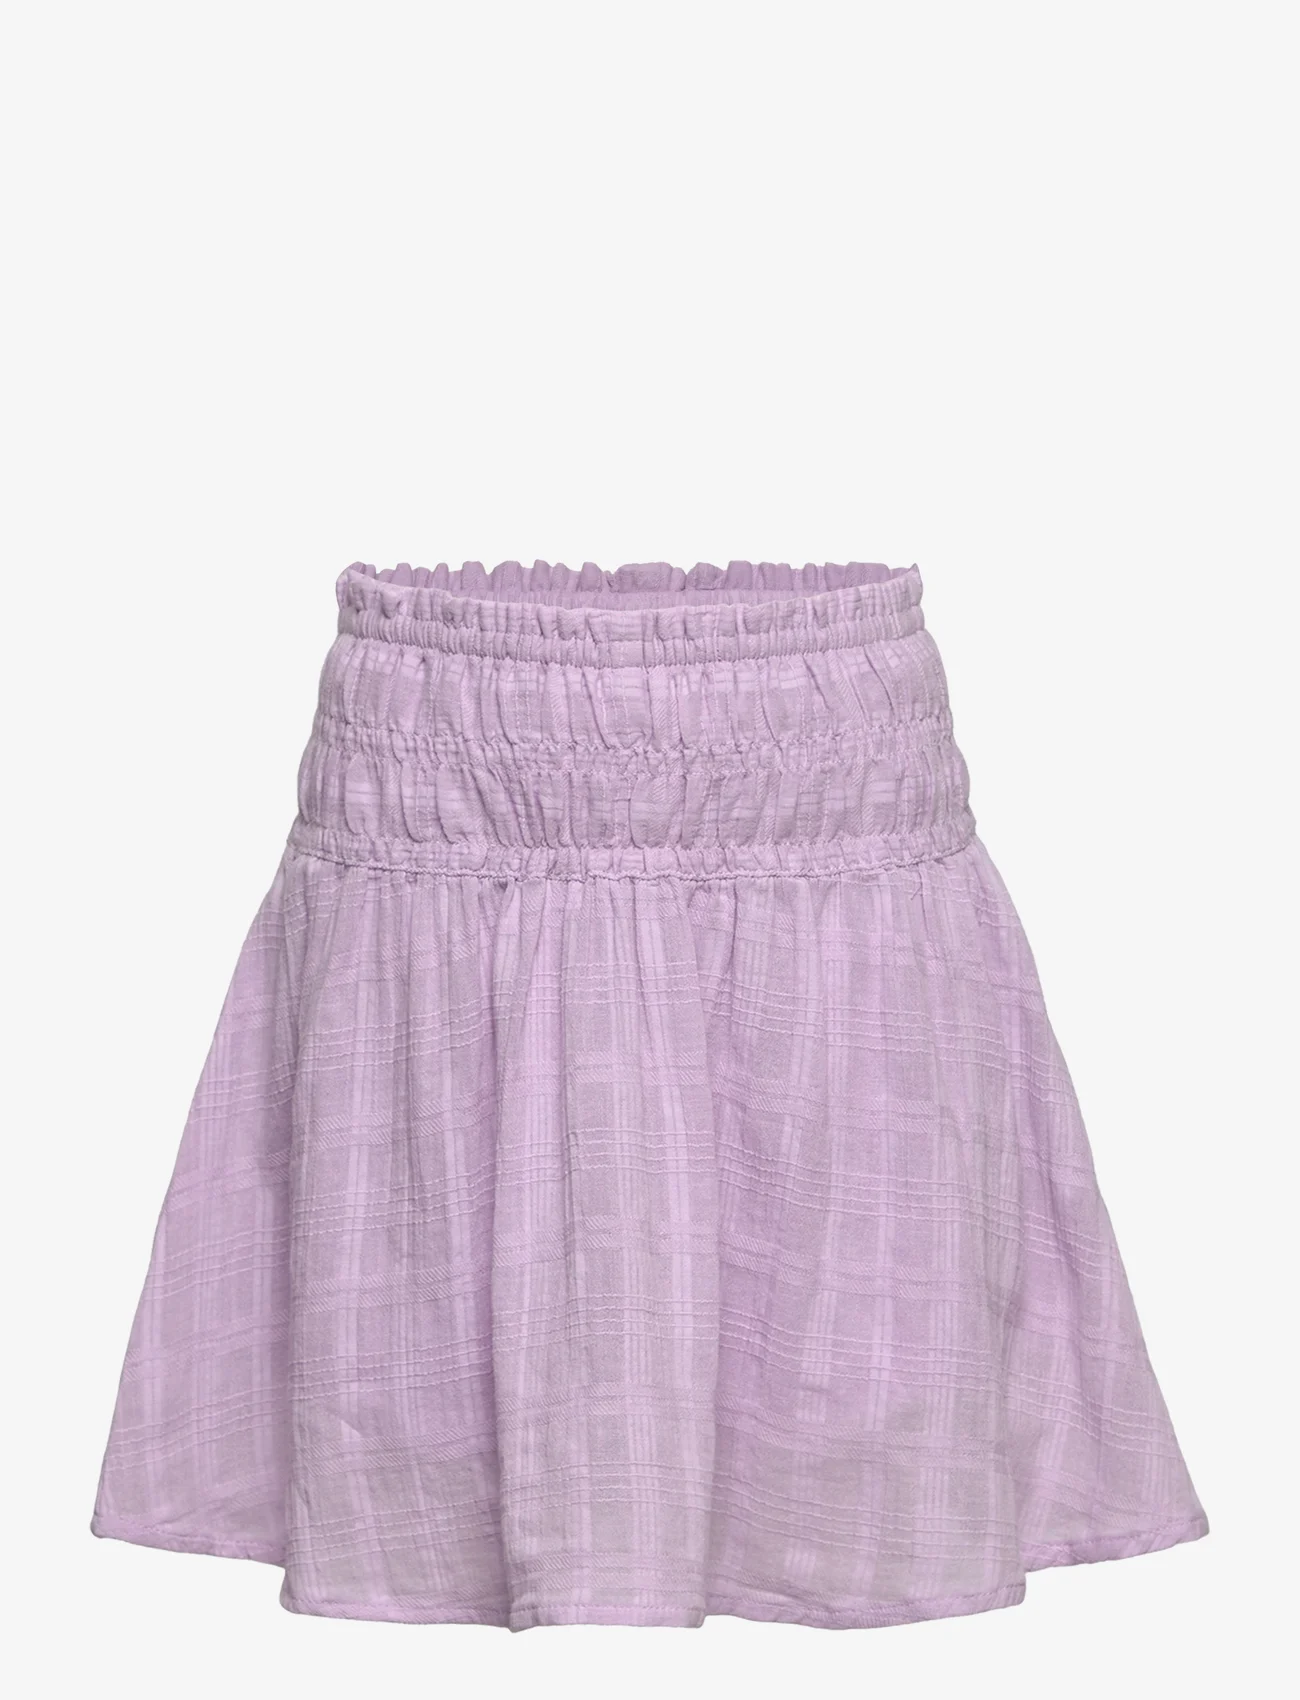 Abercrombie & Fitch - kids GIRLS SKIRTS - short skirts - orchid bloom - 0